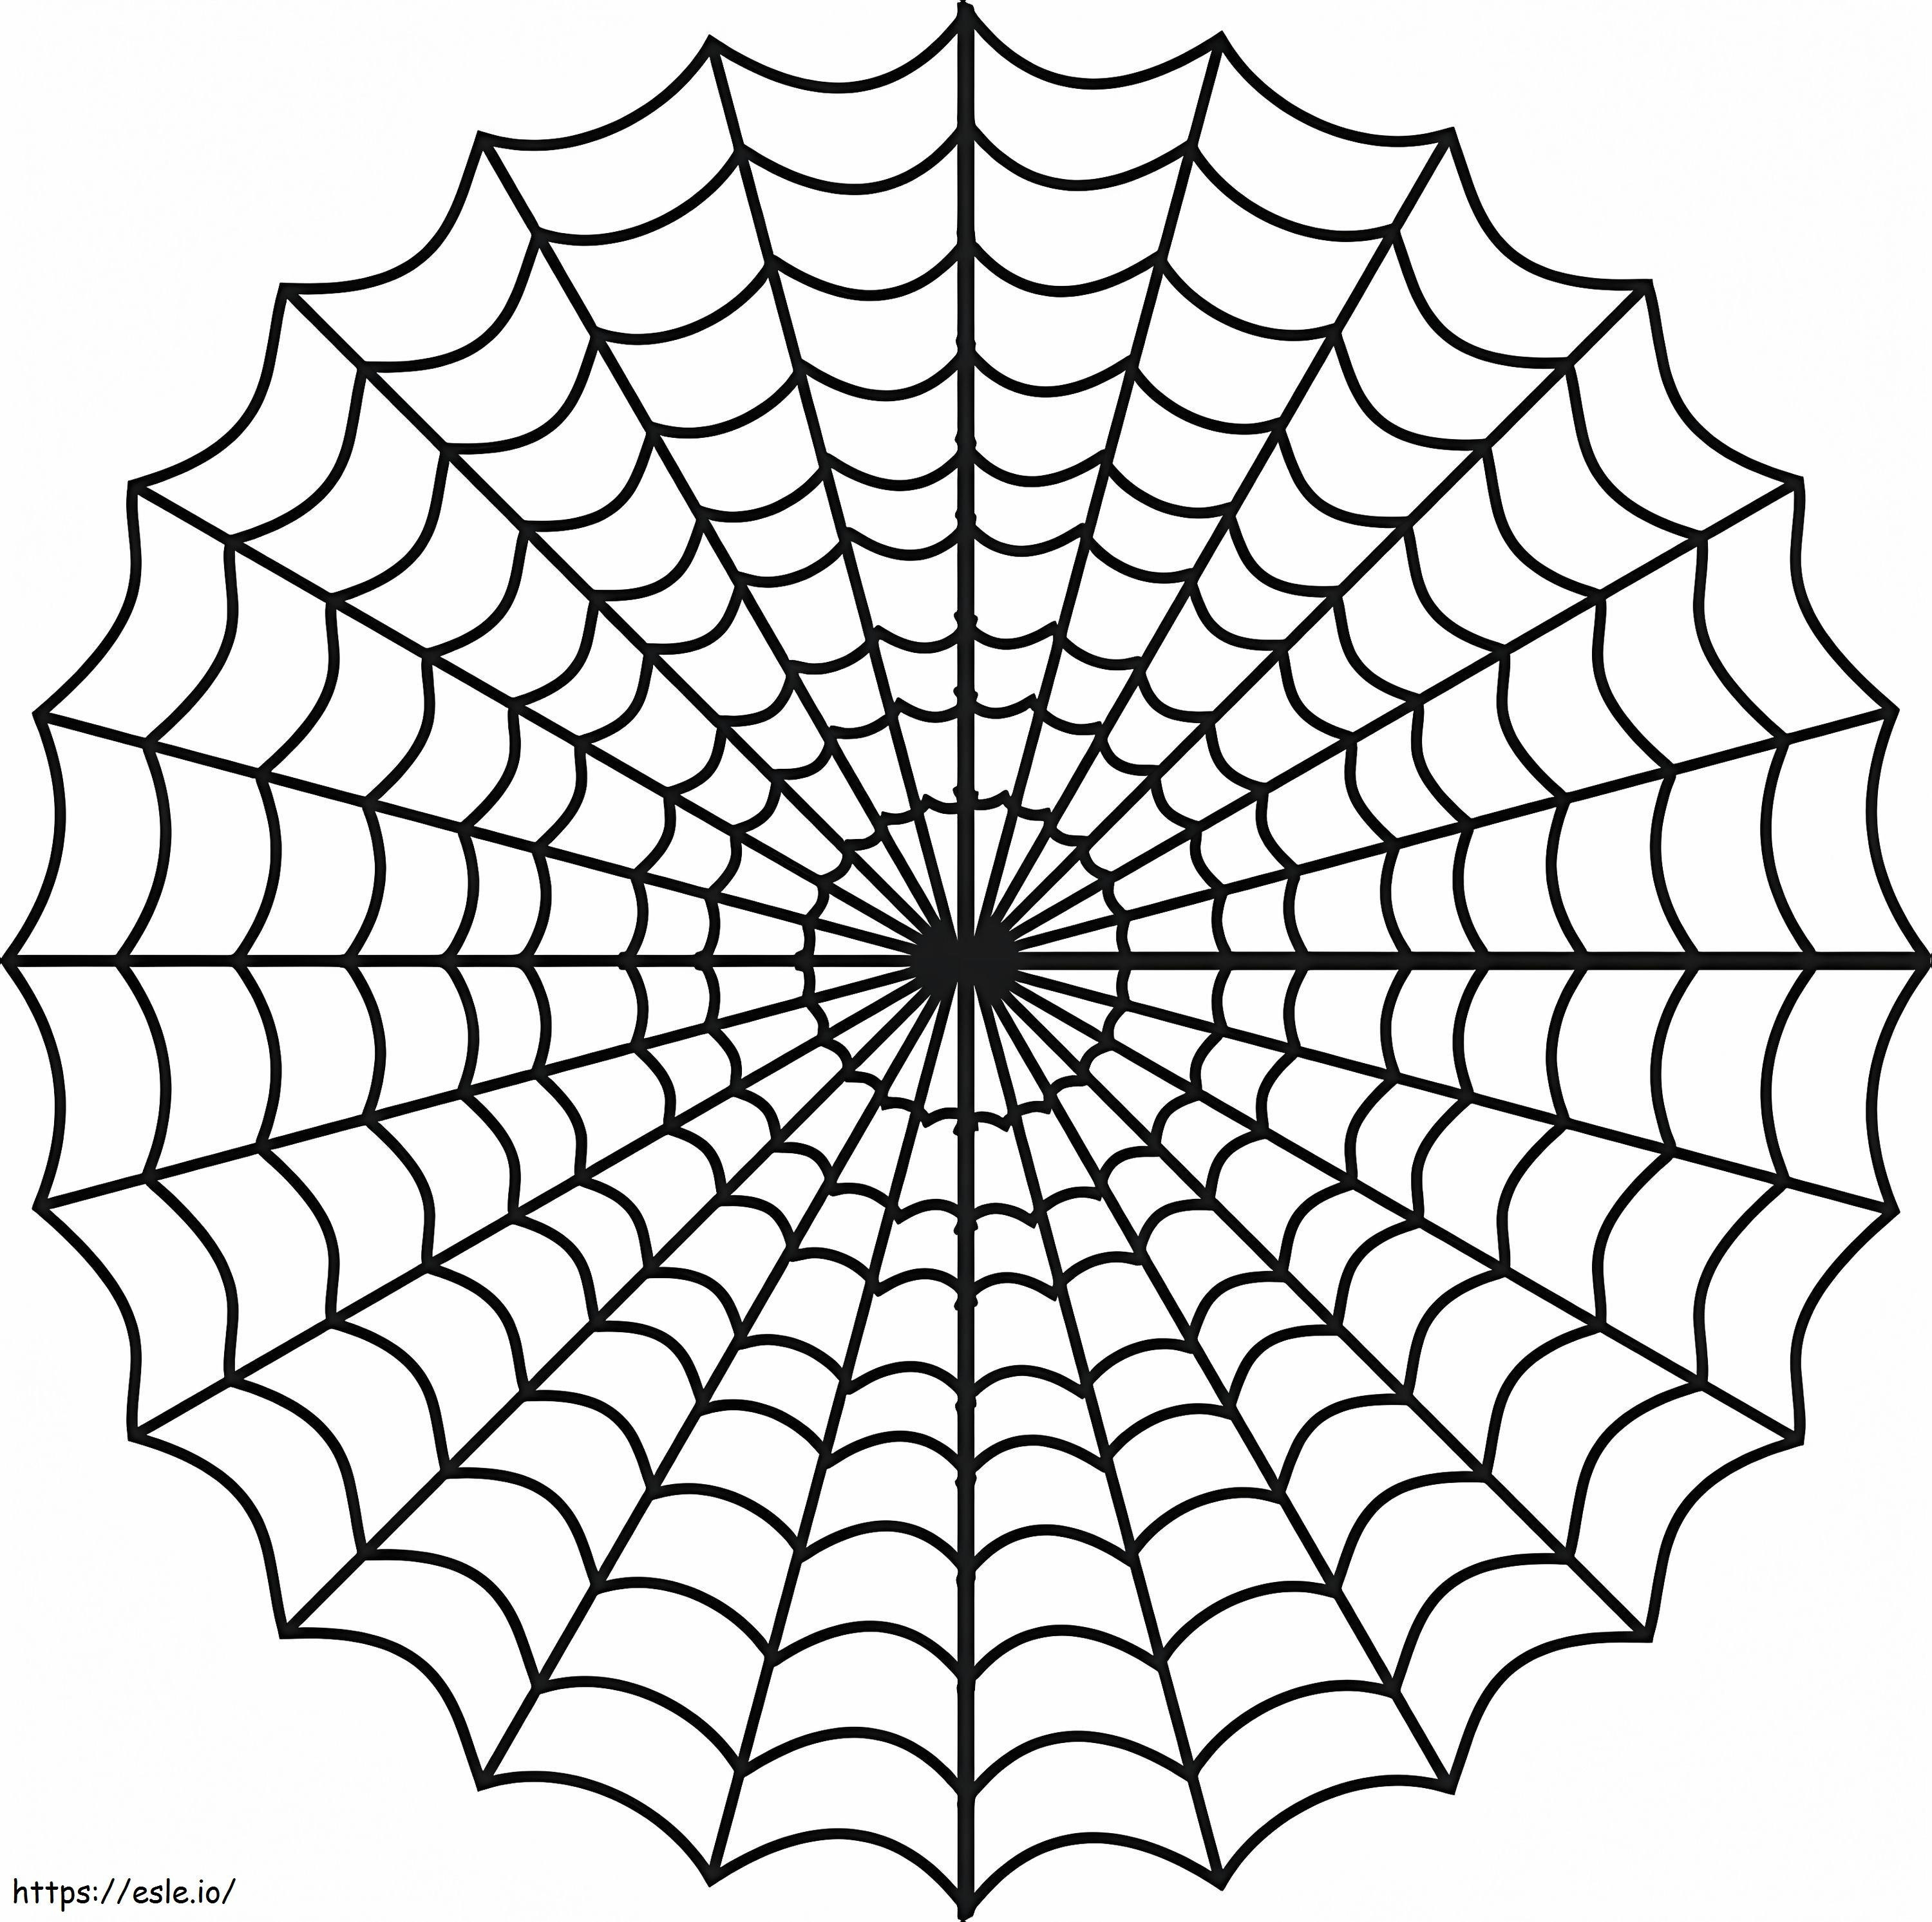 Free Printable Spider Web coloring page